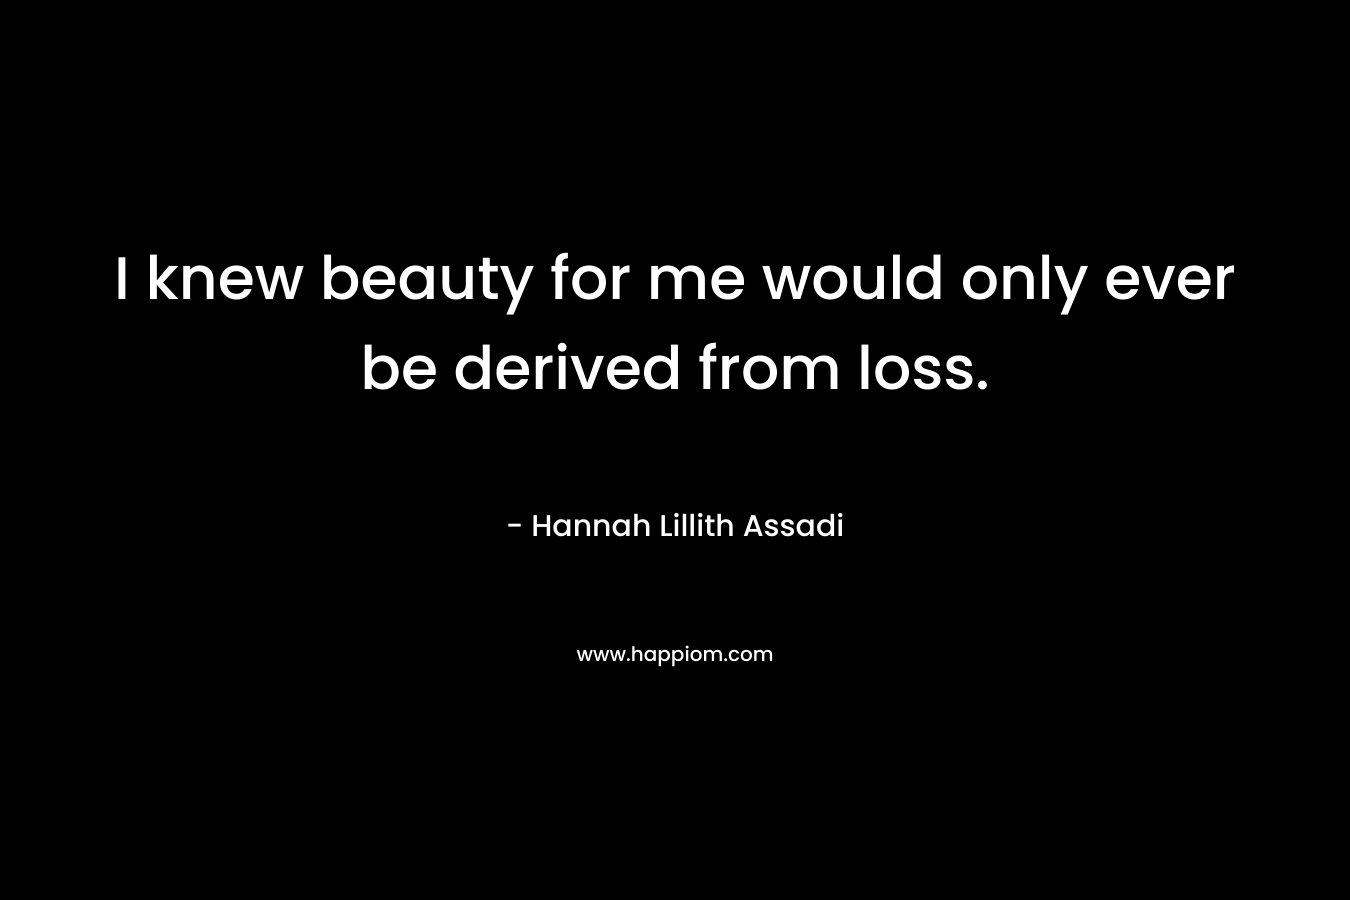 I knew beauty for me would only ever be derived from loss.